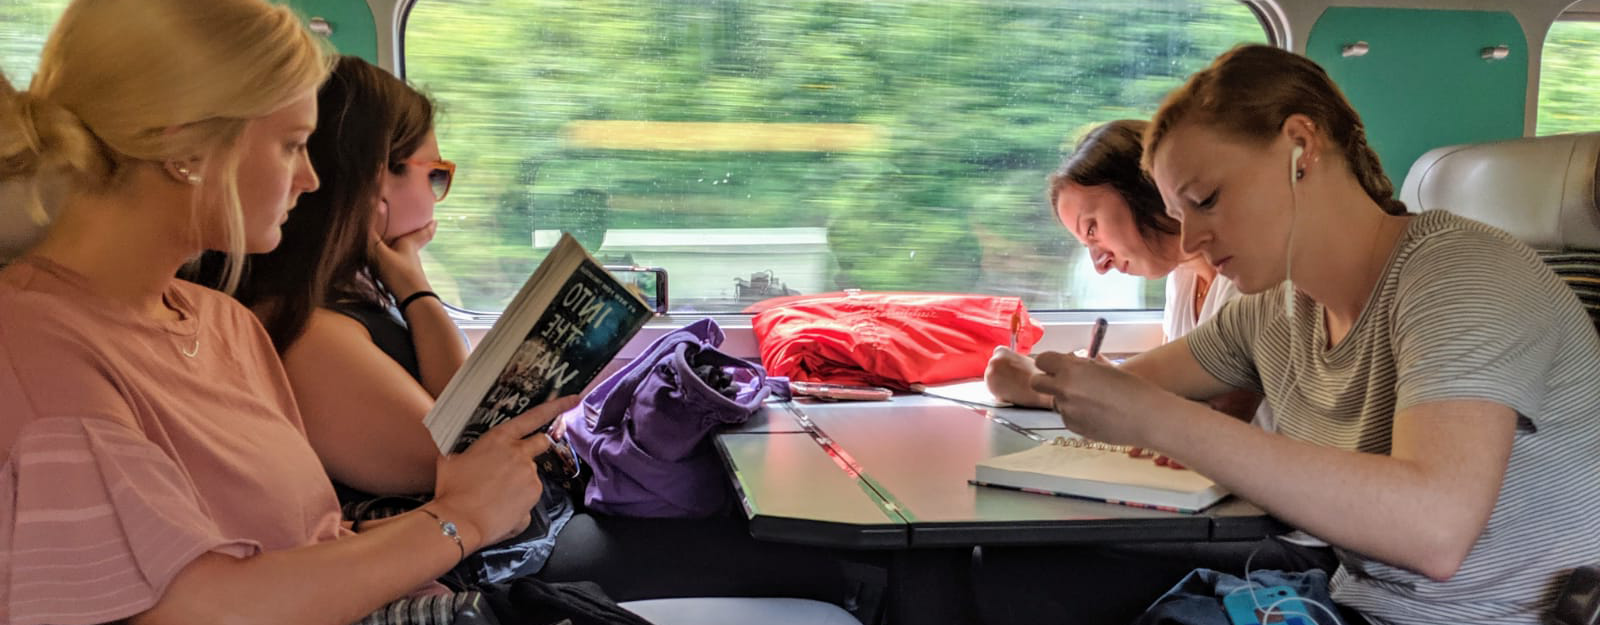 Our students can learn anywhere, even on a train in France! (Summer 2019)